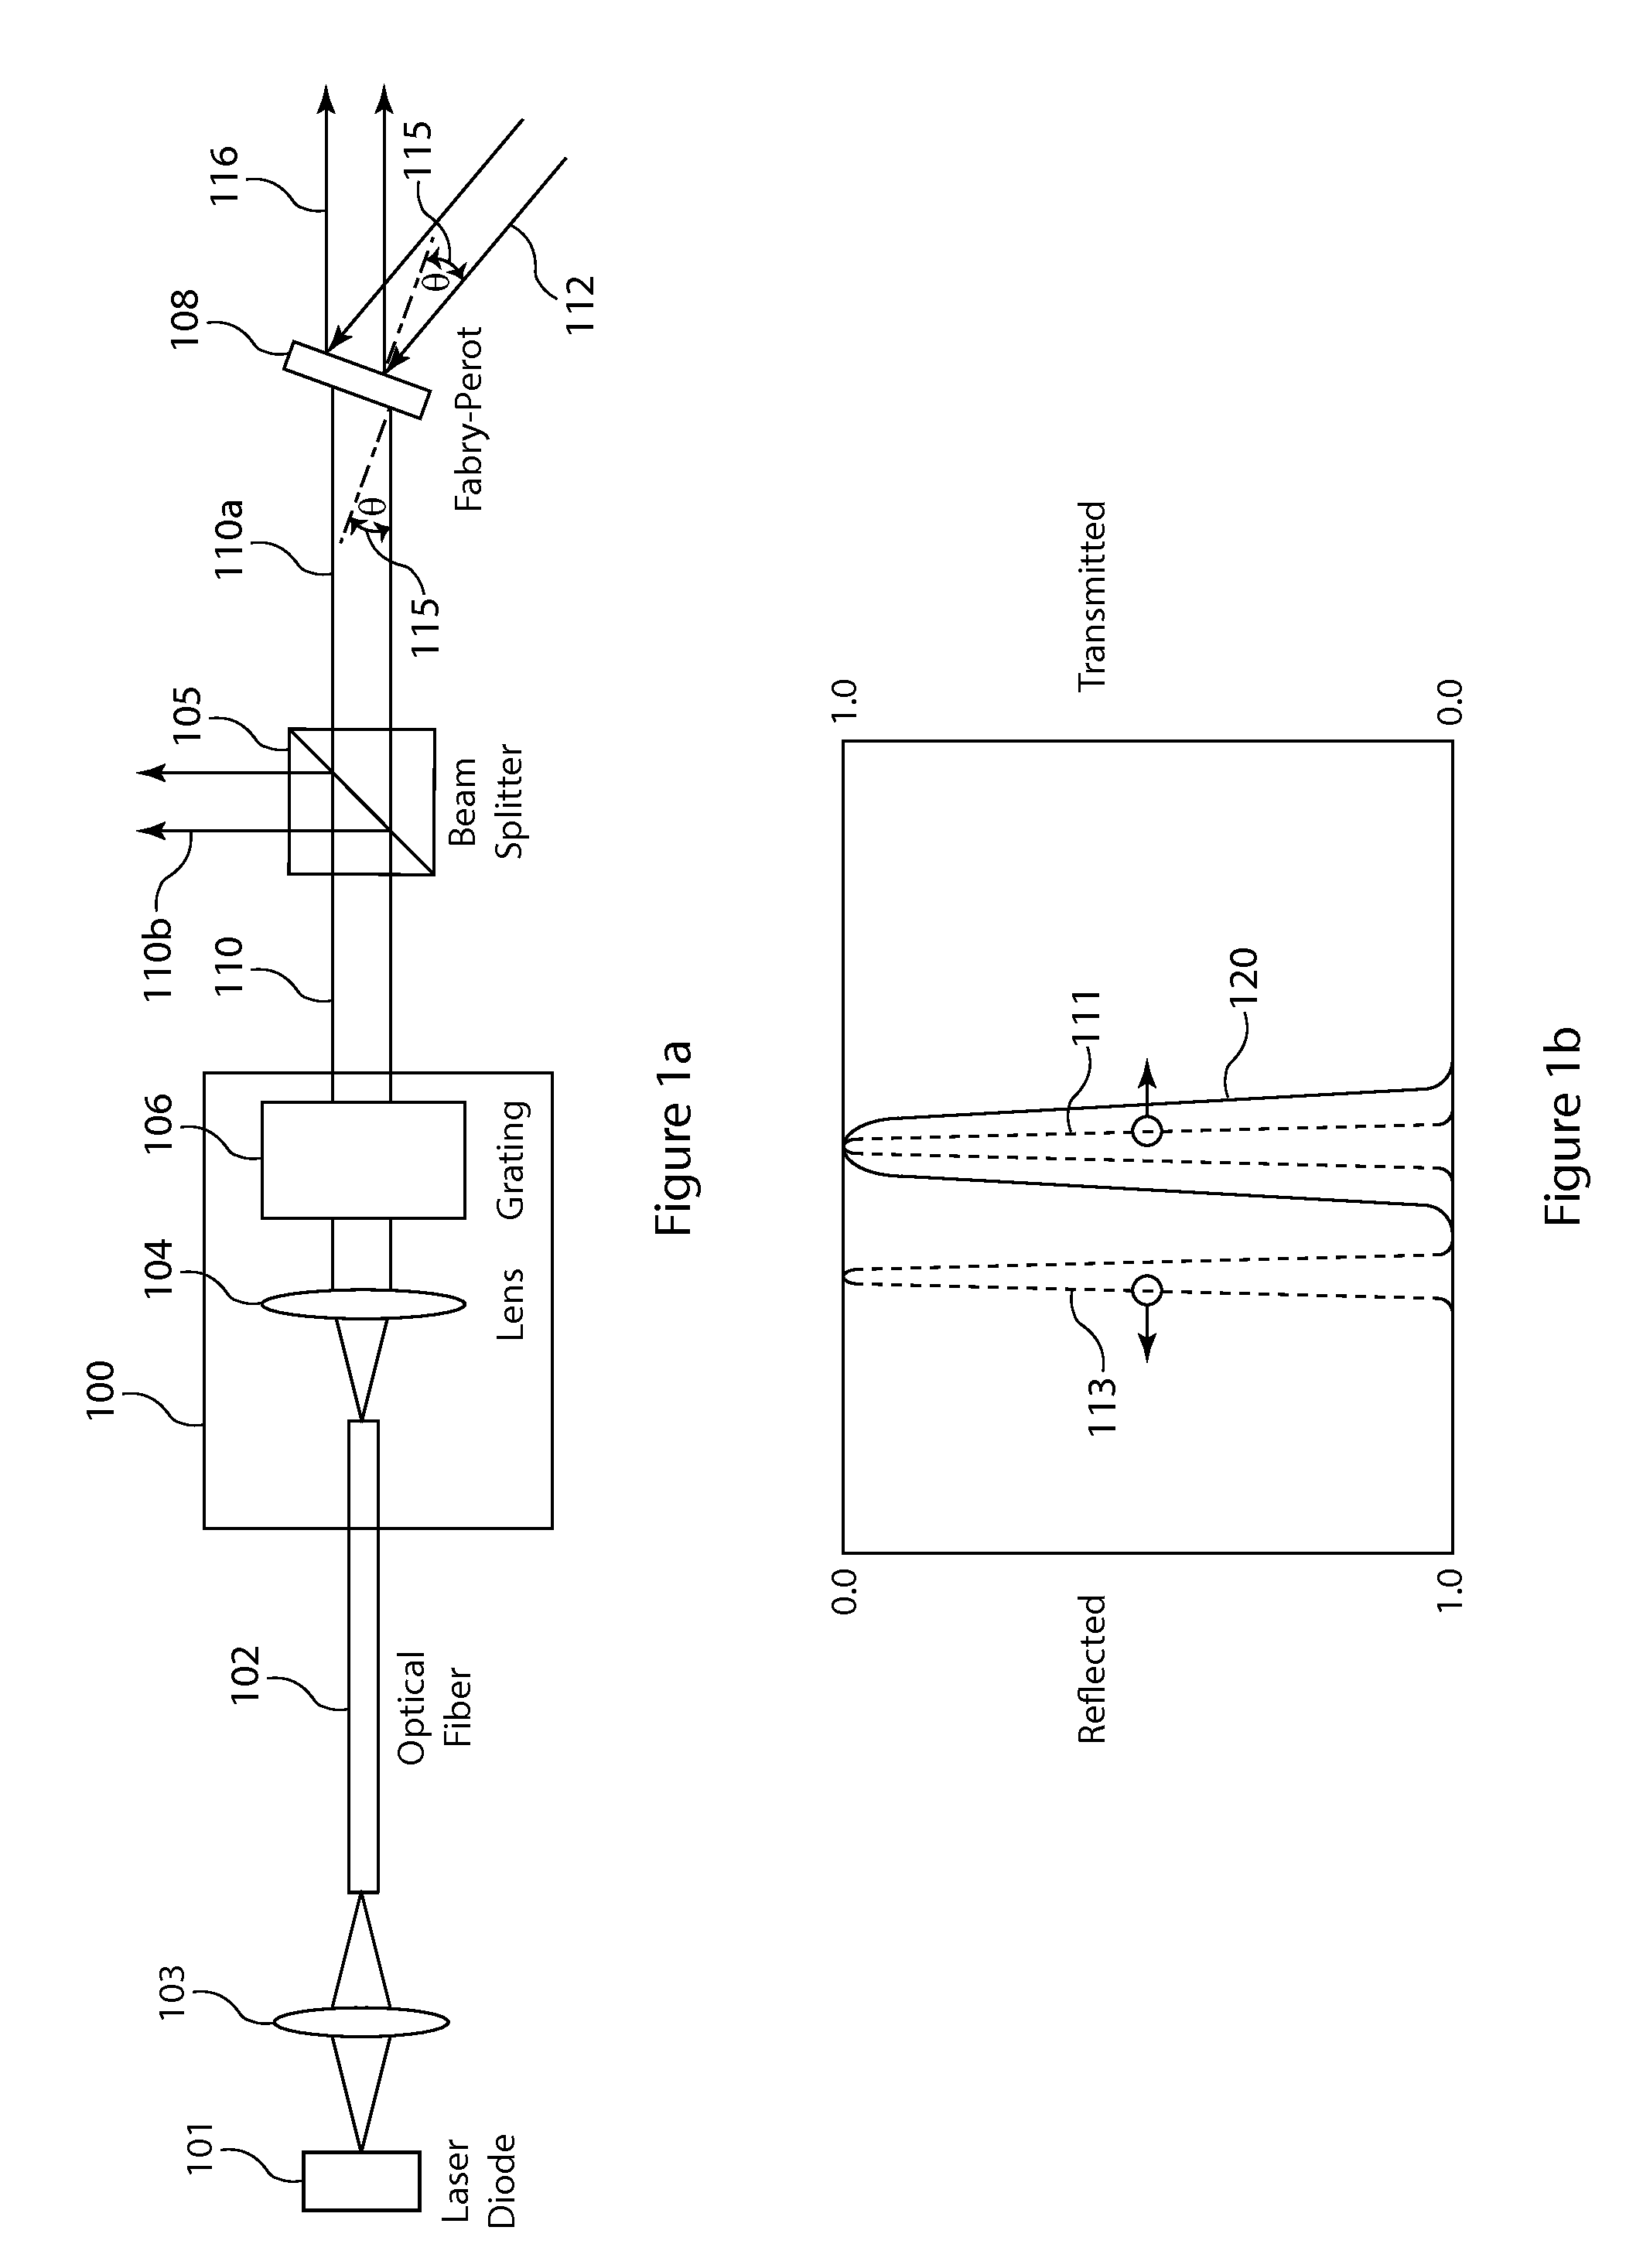 Systems and methods to provide high brightness diode laser outputs